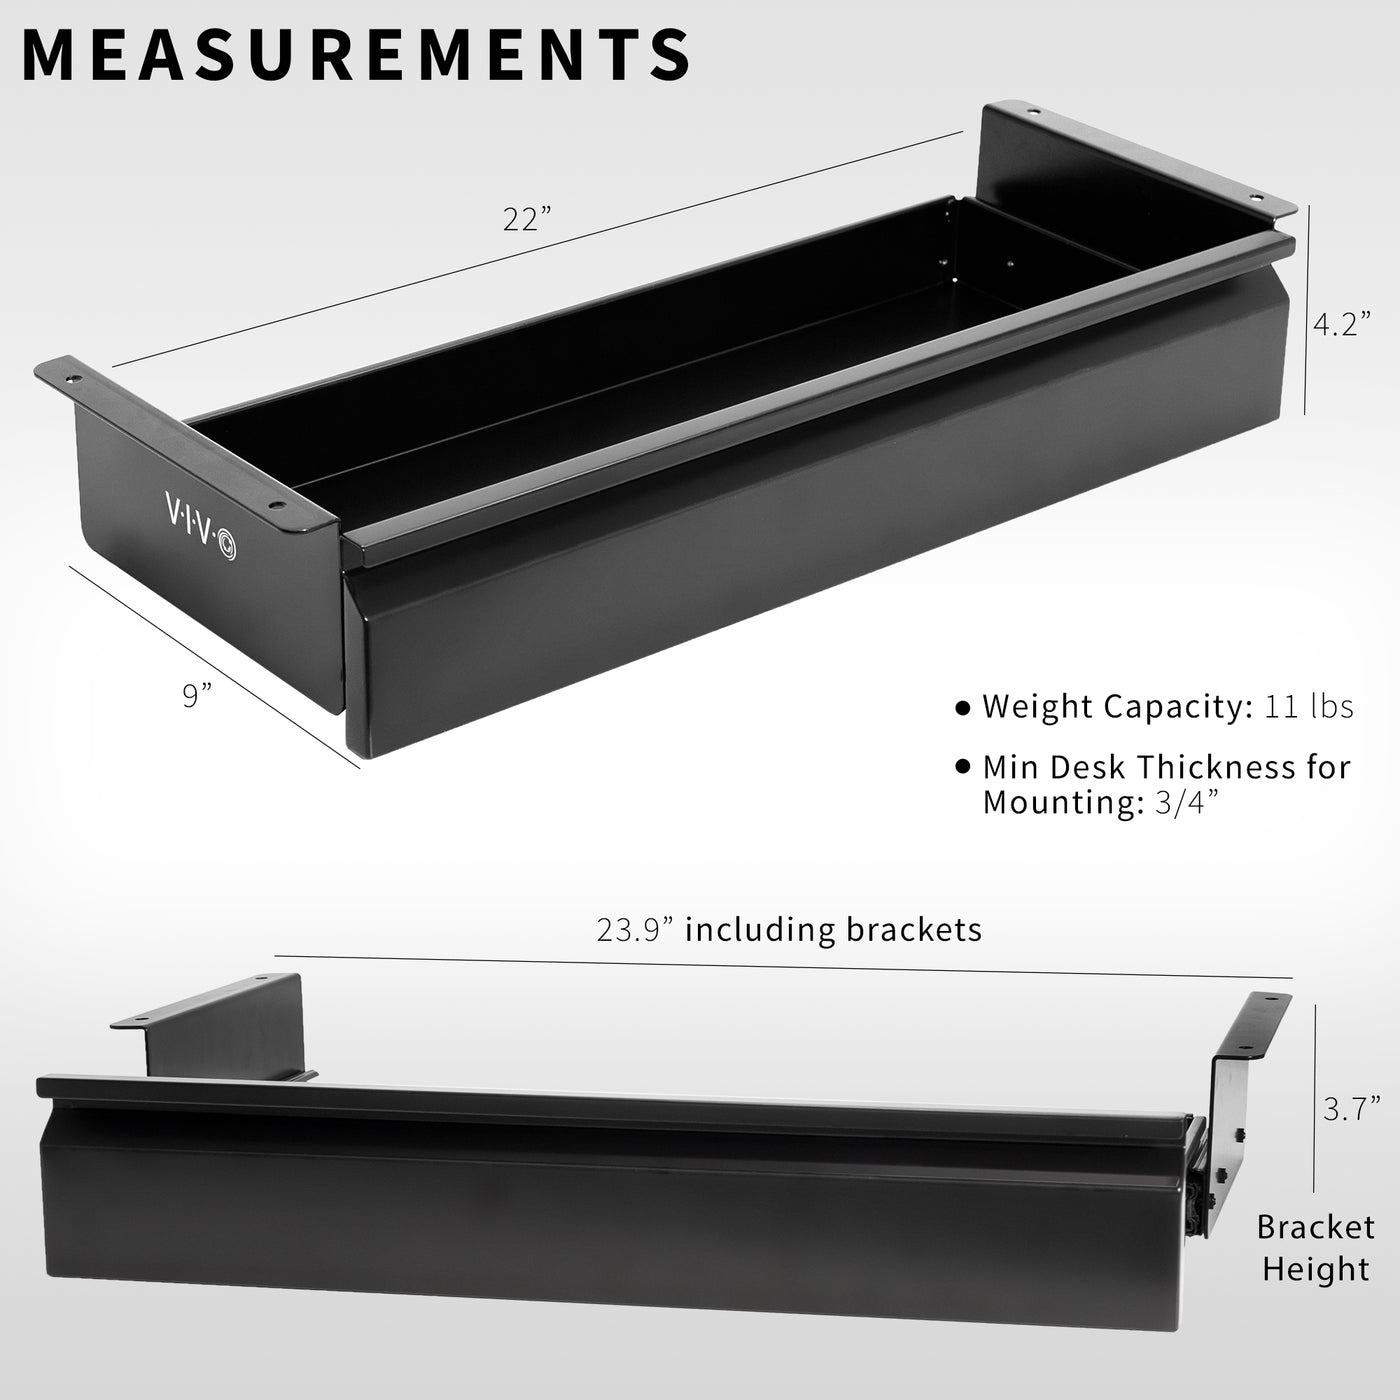 Black Extra Wide Under Desk Drawer provides a storage option for both standing and fixed height desks, creating a clean, non-cluttered workspace.